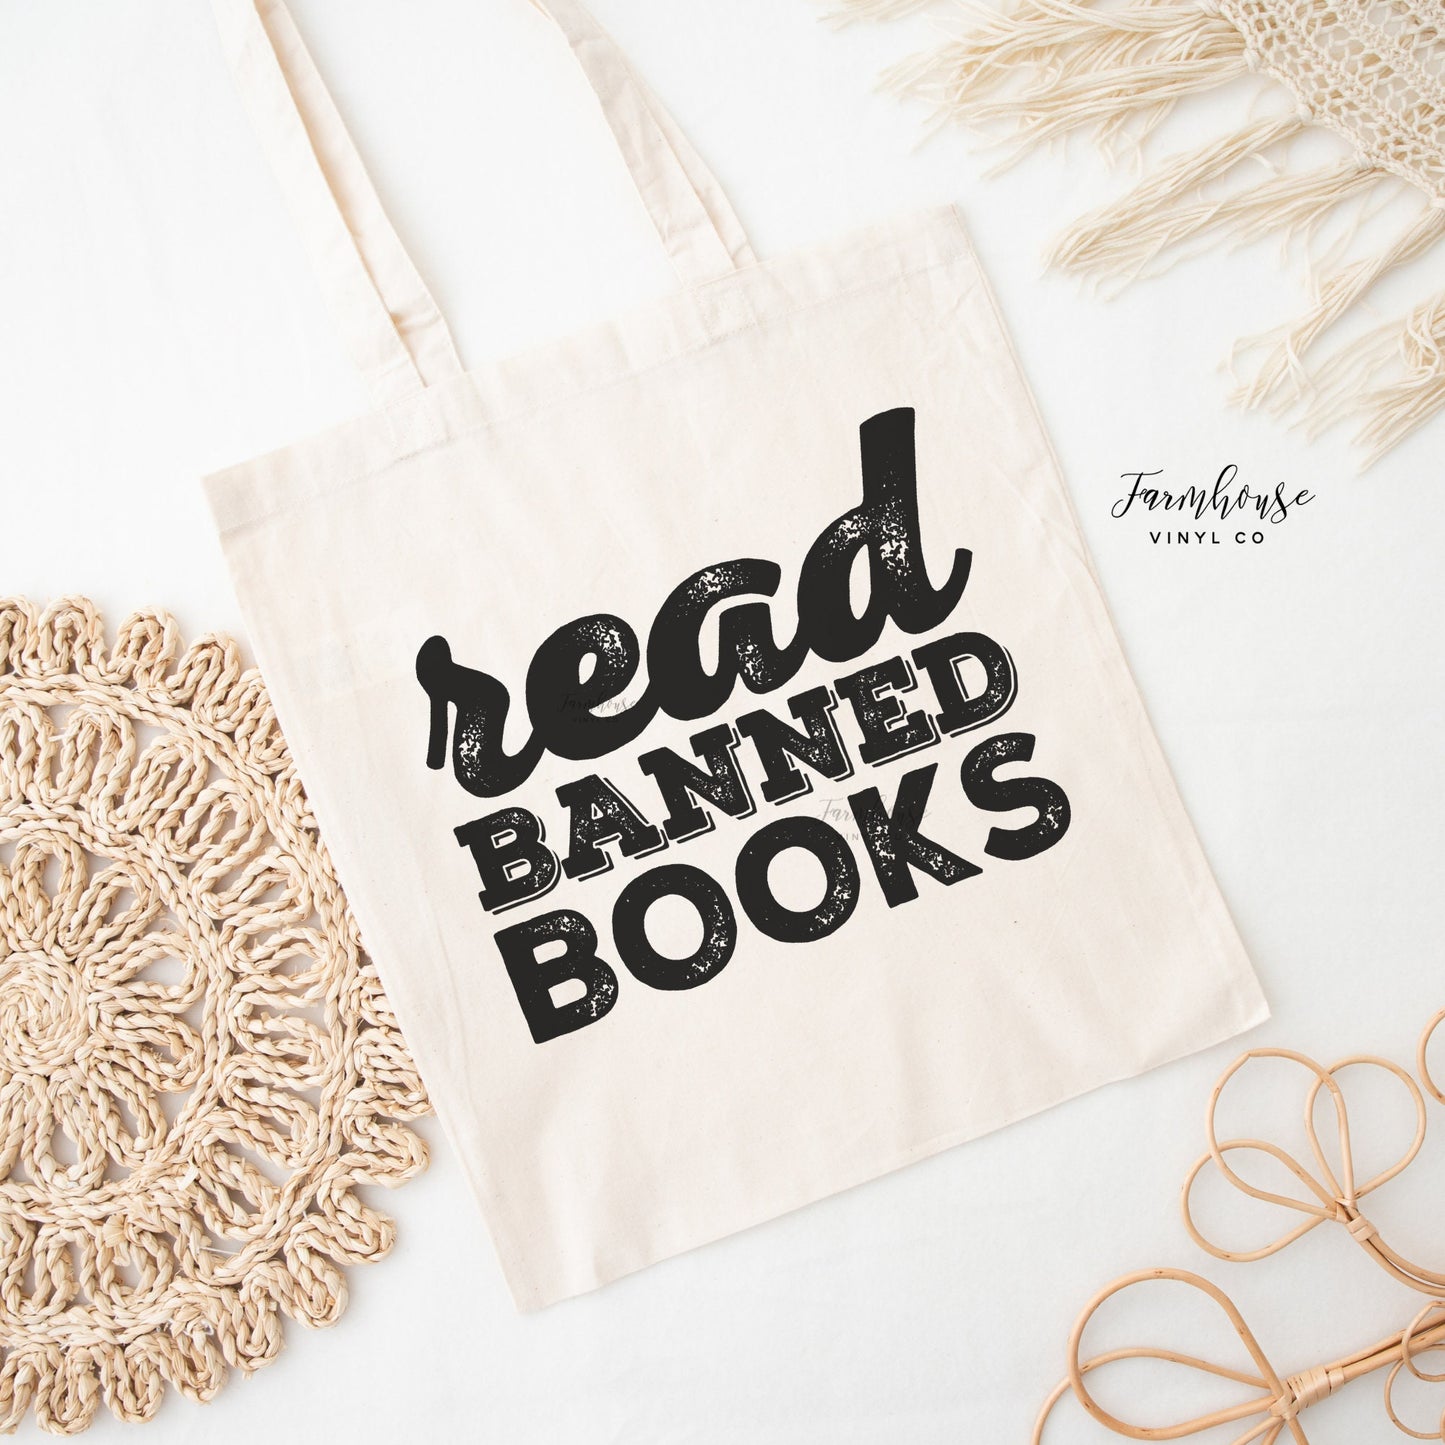 Read Banned Books Shirt / Books Not Bullets TShirt / Bookish Tee / Librarian Shirt / Social Justice Gift / Equality T-Shirt / Reading Tees - Farmhouse Vinyl Co